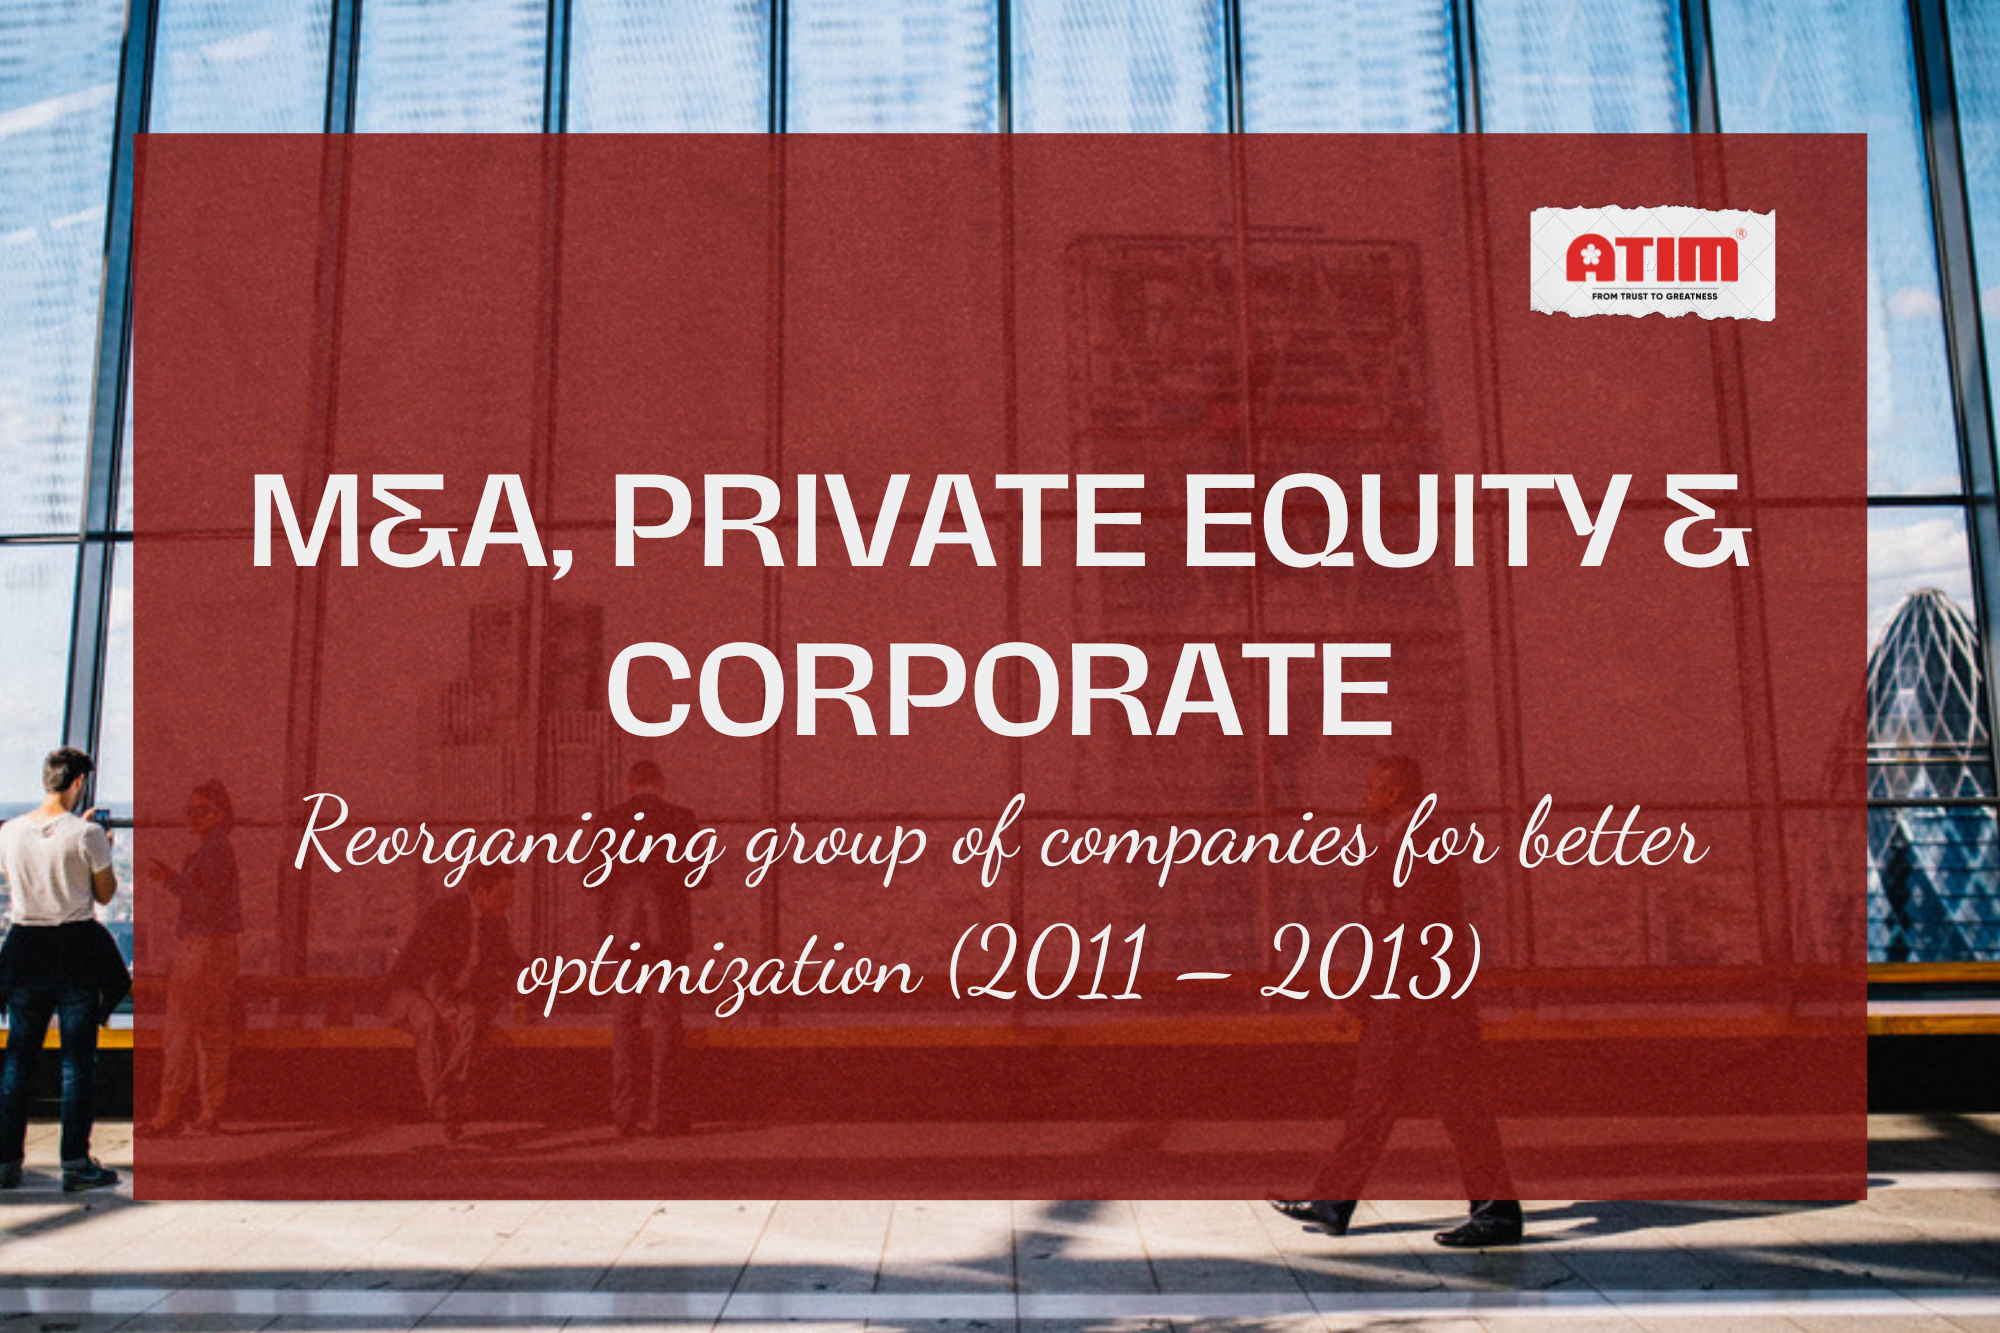 M&A, Private Equity and Corporate - Reorganizing group of companies for better optimization